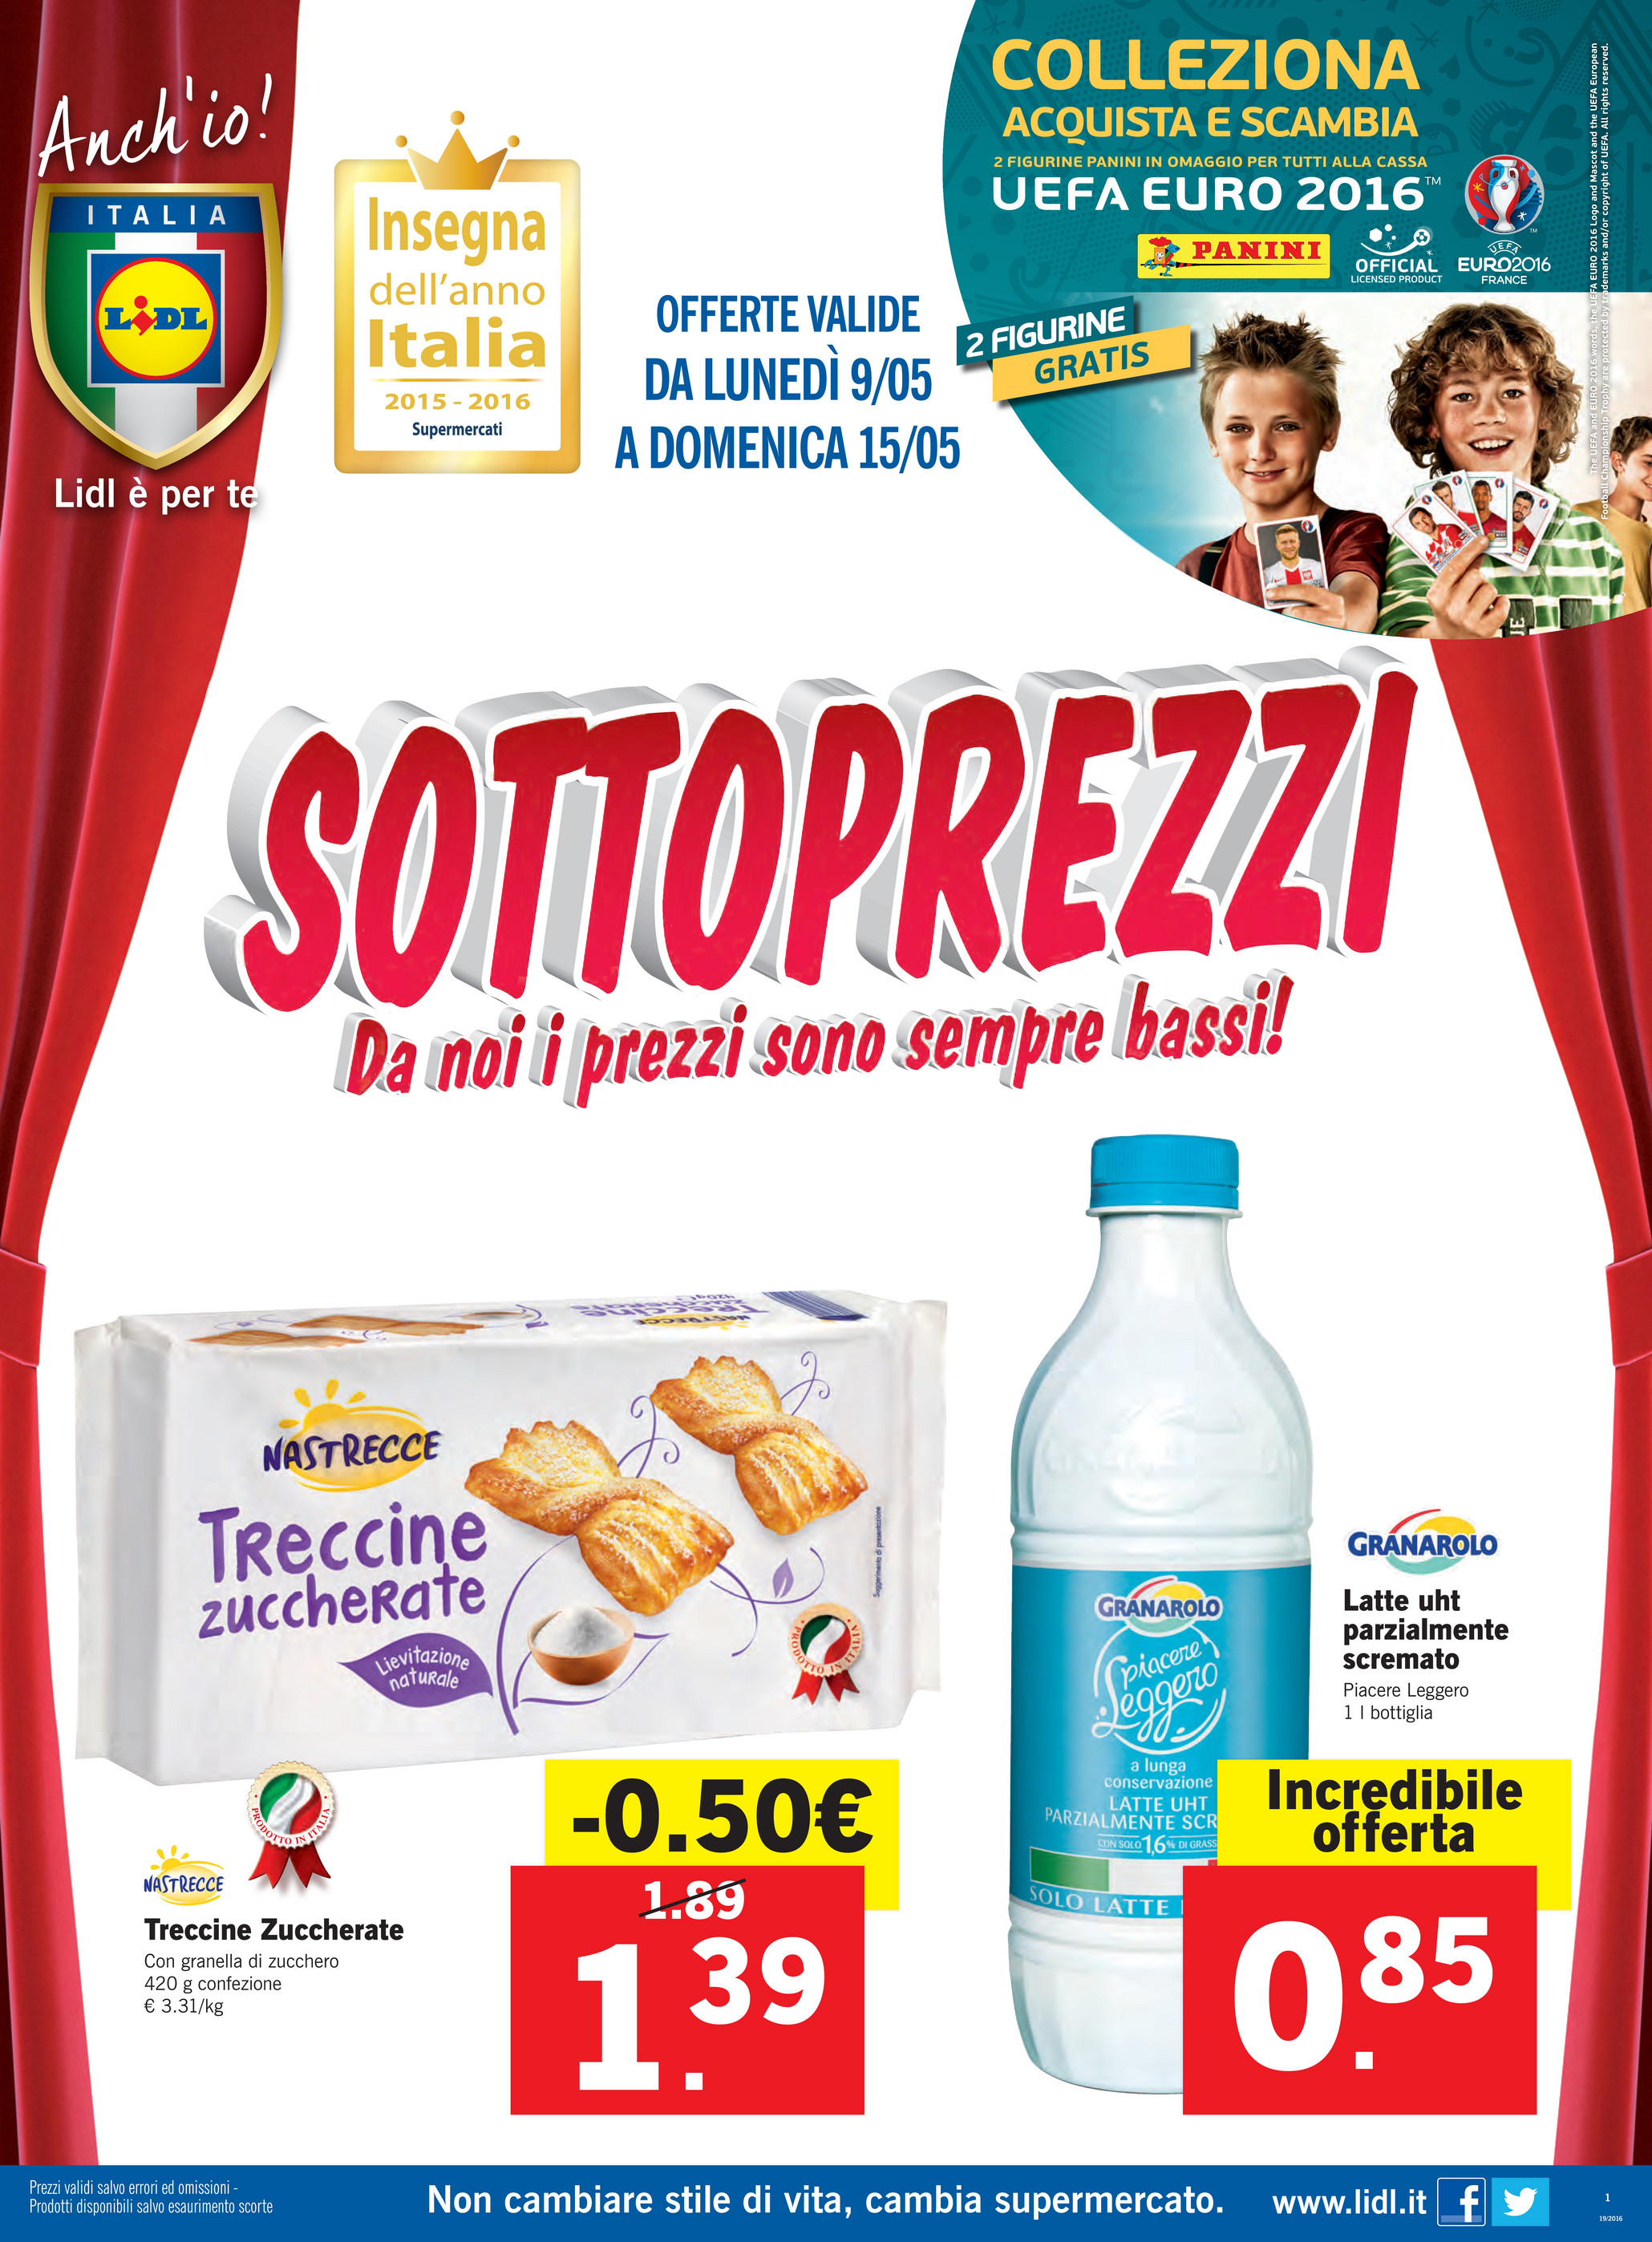 SP - Volantino Lidl - Sottoprezzi - Page 24-25 - Created with Publitas.com